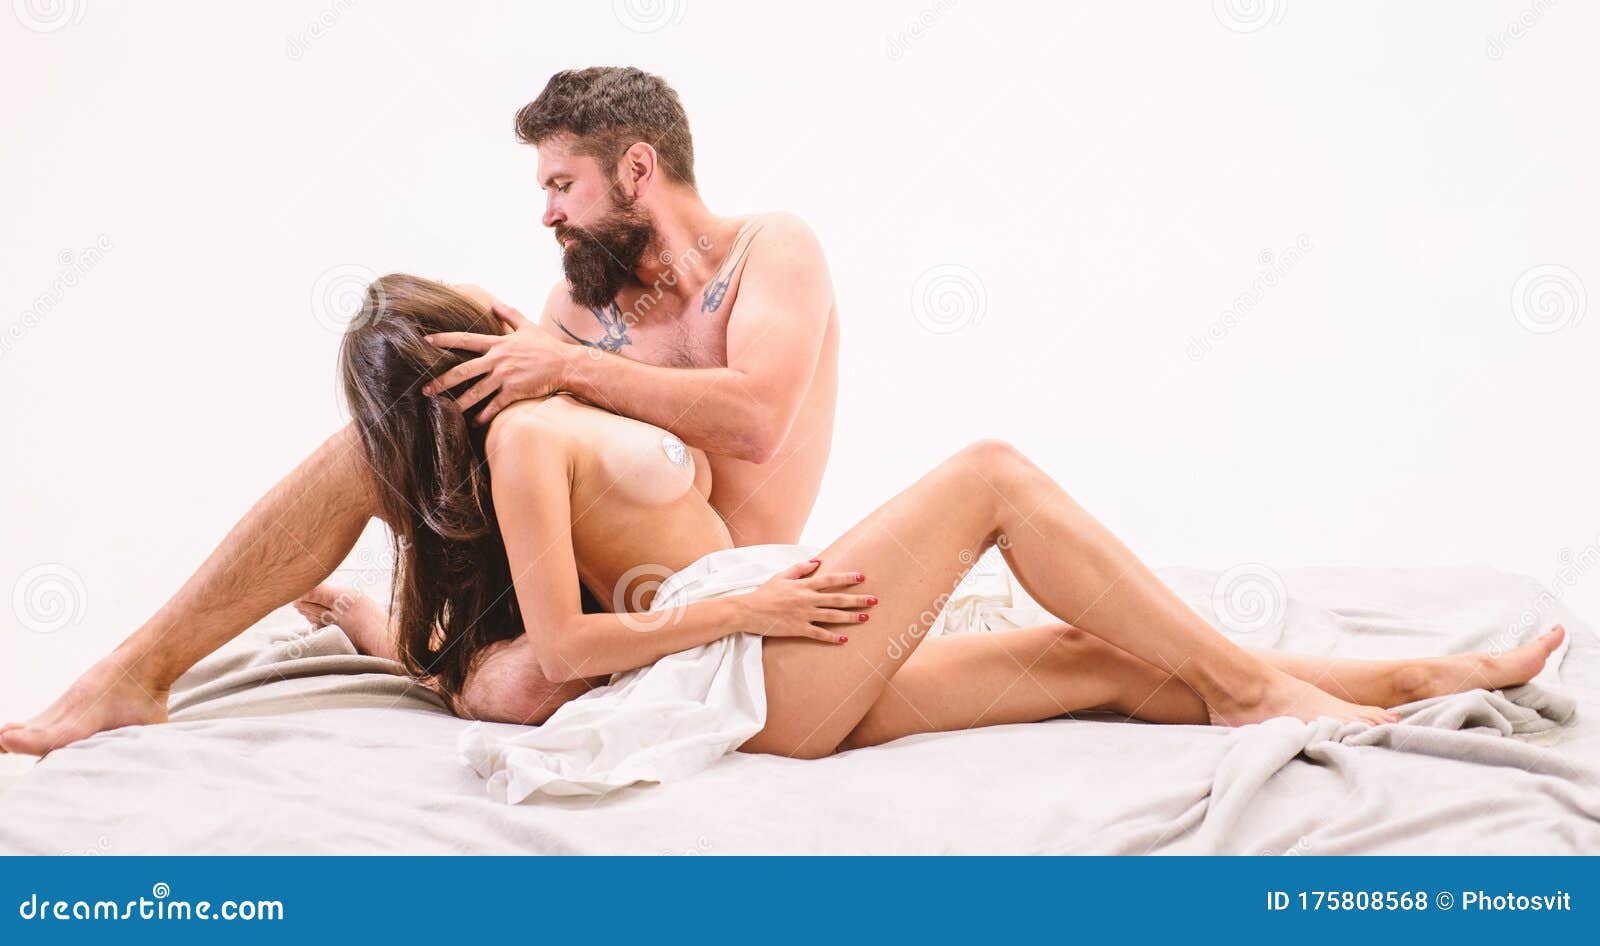 Passionate Lover Touch Breasts of Girlfriend. Passionate Foreplay Tease  Female. Love and Passion Concept Stock Photo - Image of relax, love:  175808568